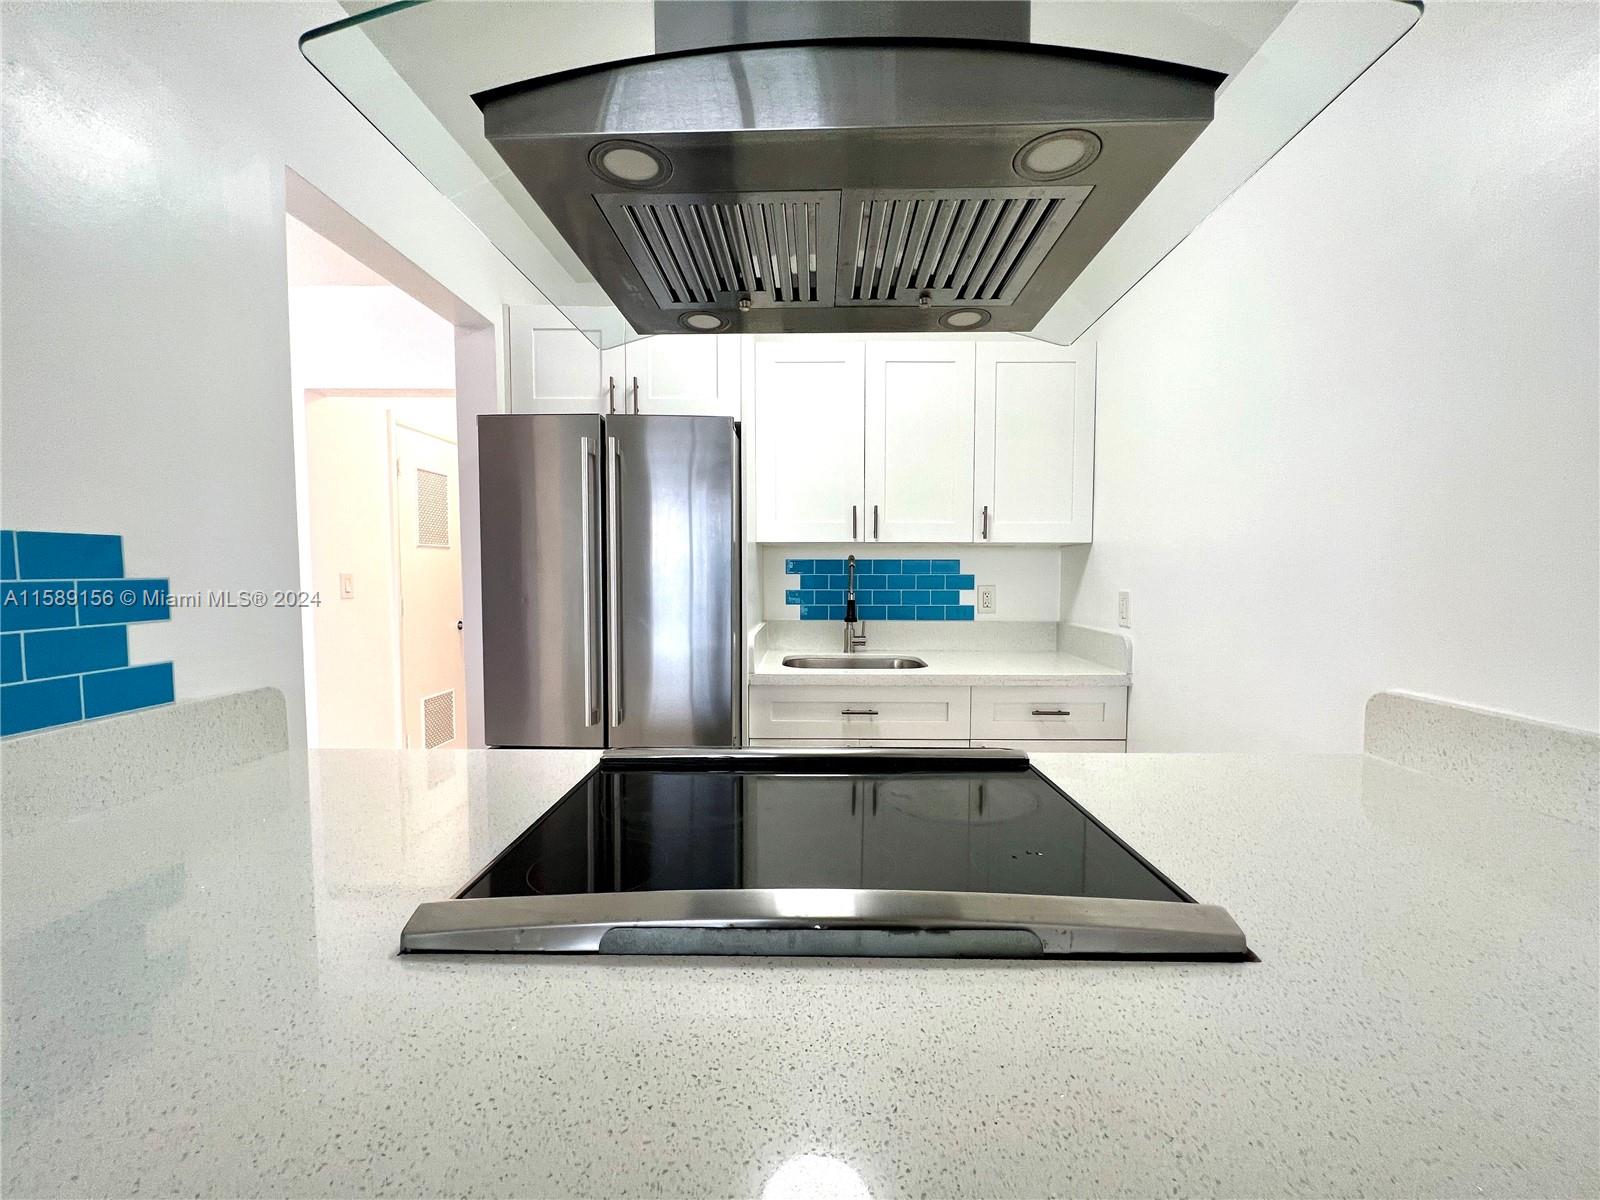 a kitchen with stainless steel appliances a sink a refrigerator and window